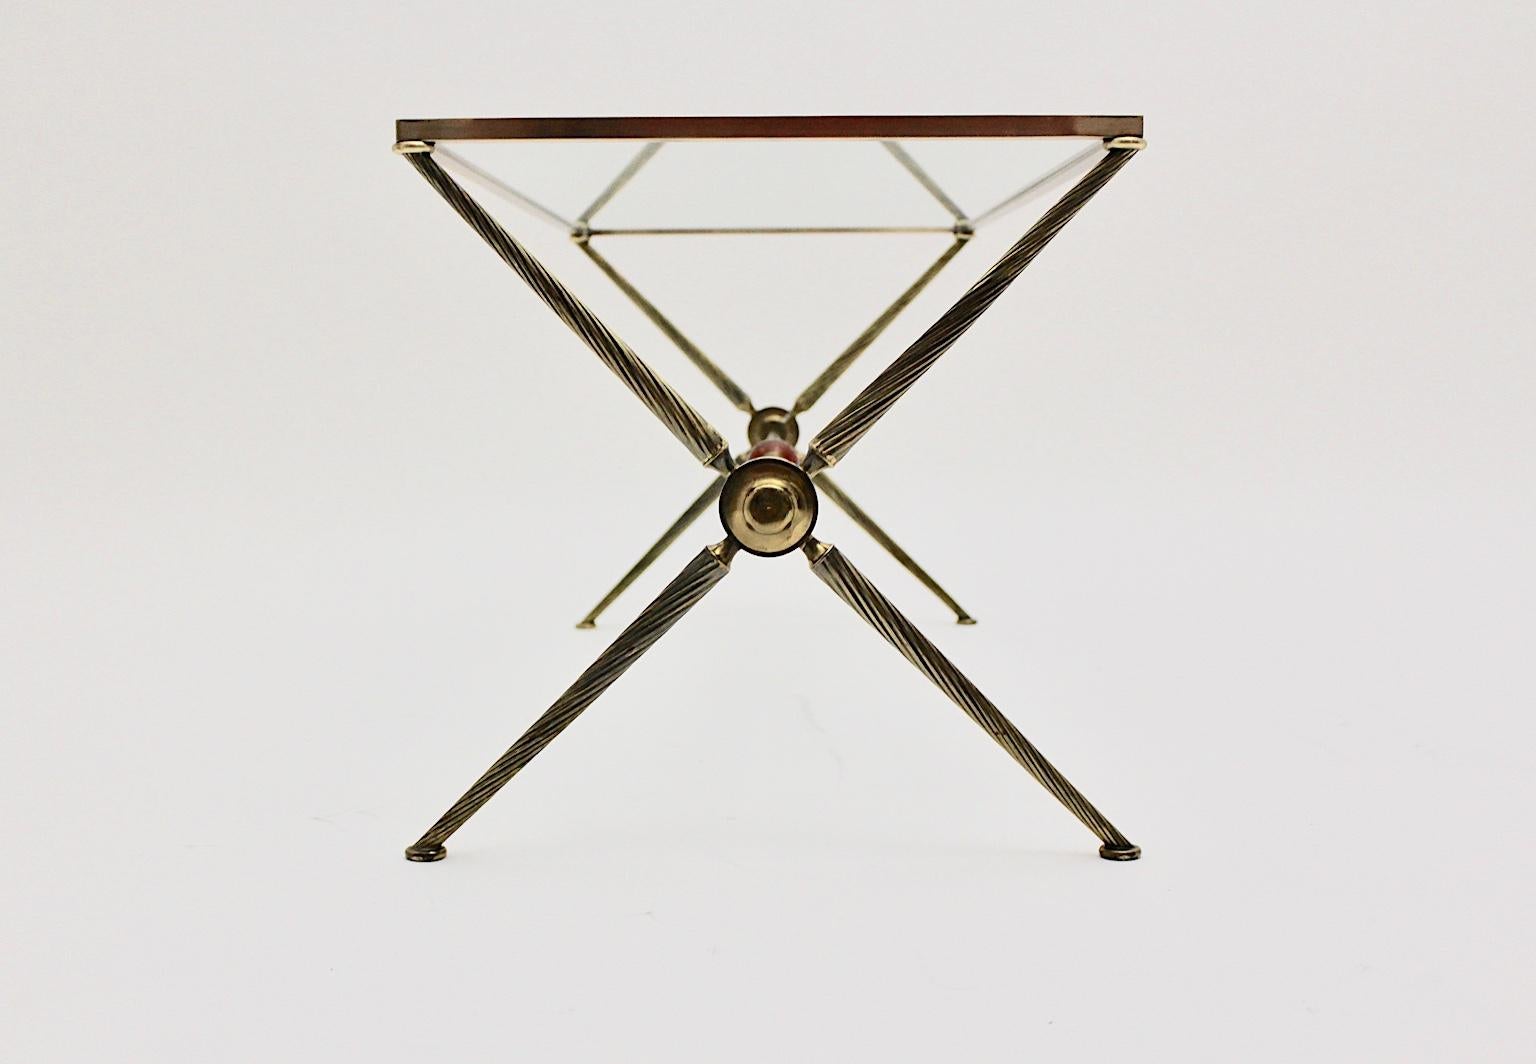 This elegant coffee table / sofa table by Maison Bagues attributed. Consists of a X-base and solid turned brass conical table legs.
The connection between the table legs is embellished with an amber colored bakelite ball.
Over the x form legs